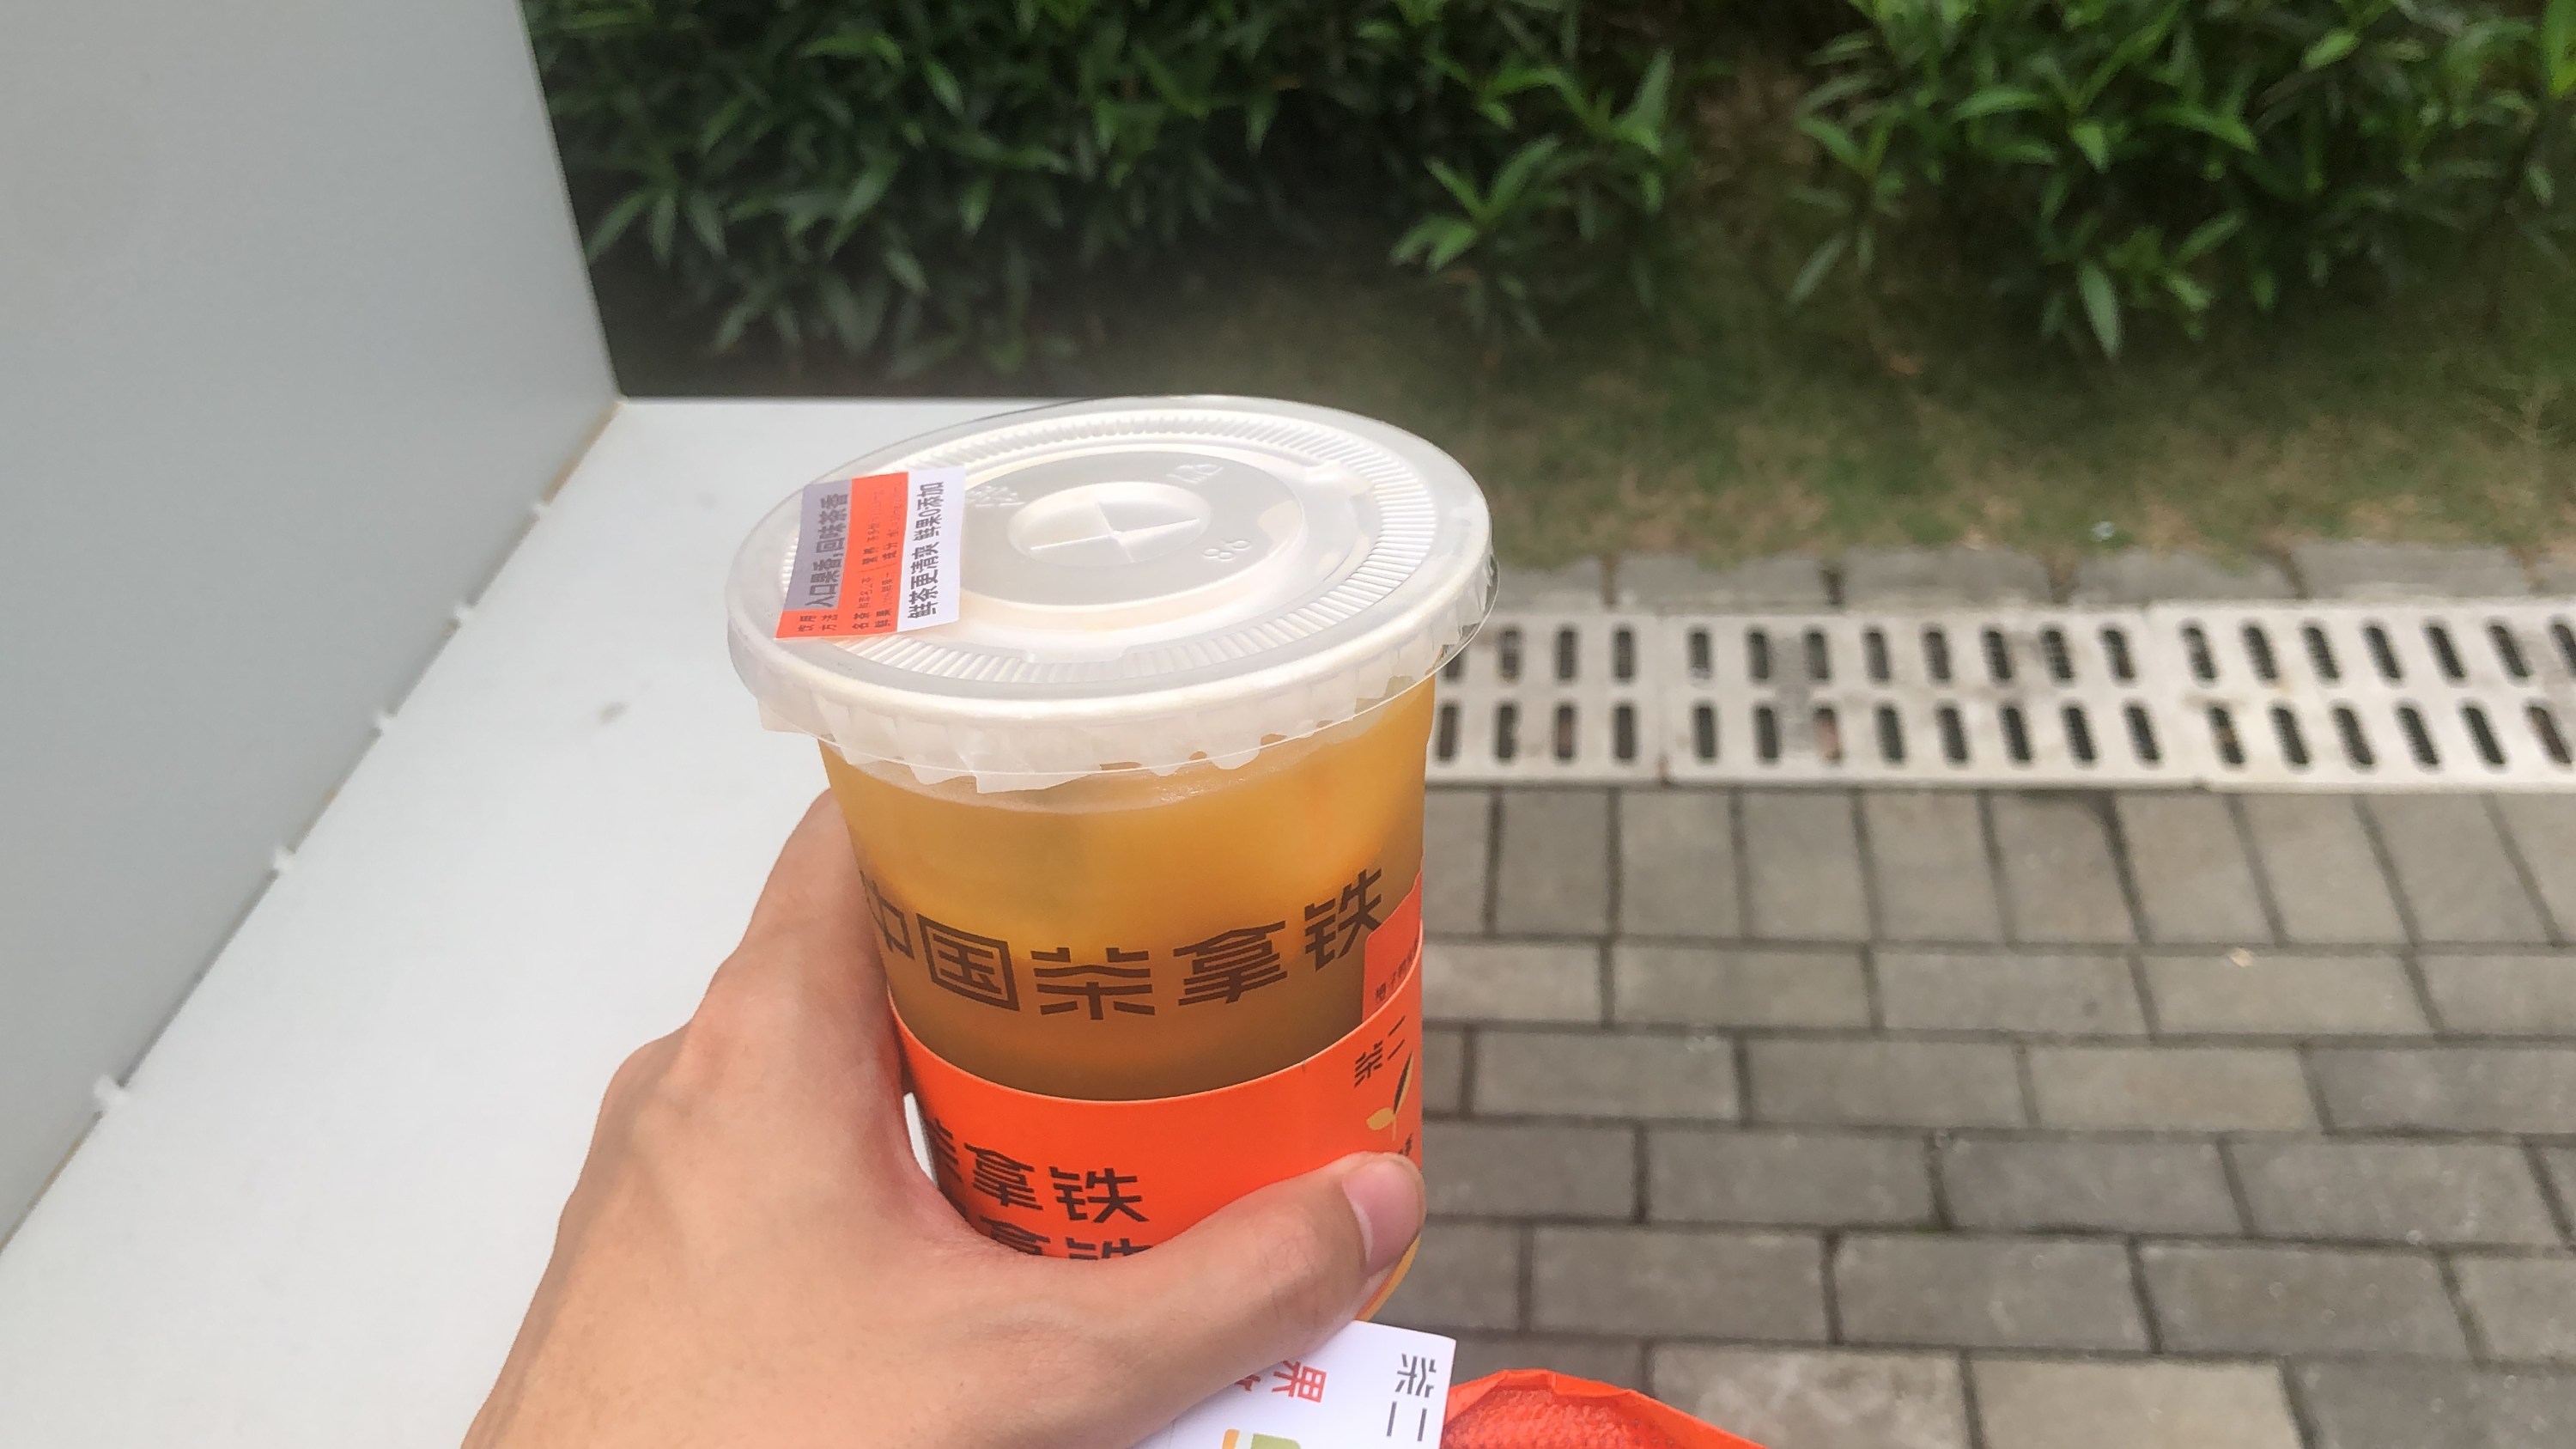 A hand holding a cup of iced tea.